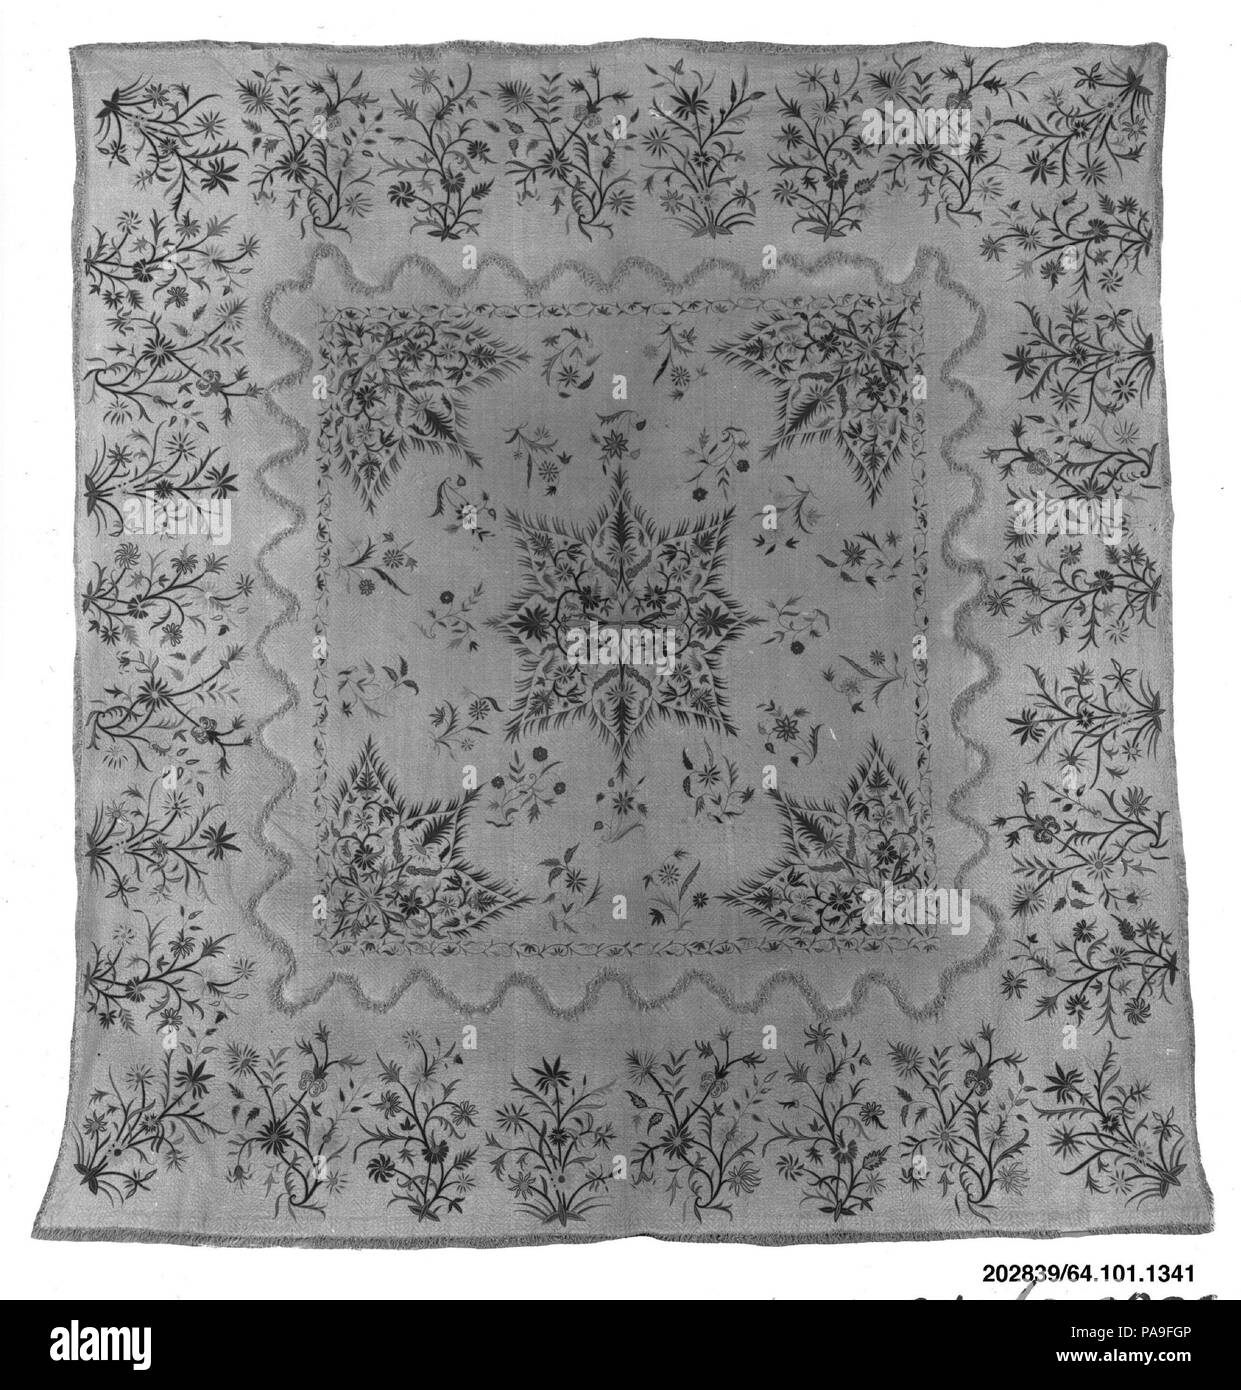 Quilted bed cover. Culture: British. Dimensions: Overall: 95 × 90 in. (241.3 × 228.6 cm). Date: first quarter 18th century. Museum: Metropolitan Museum of Art, New York, USA. Stock Photo